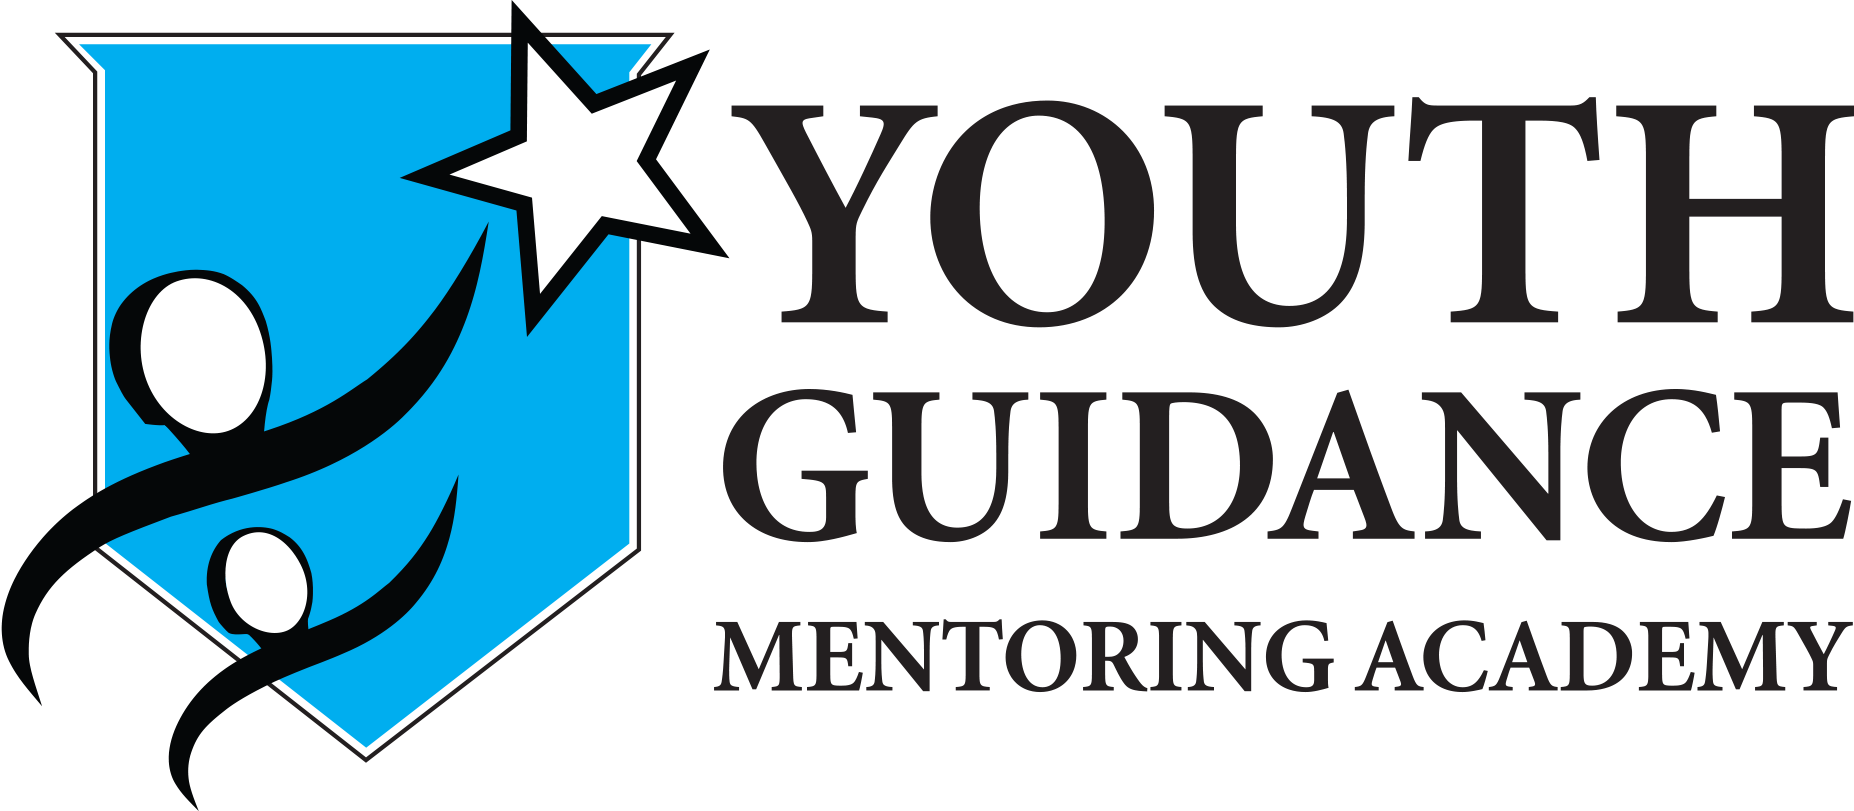 Youth Guidance Mentoring Academy